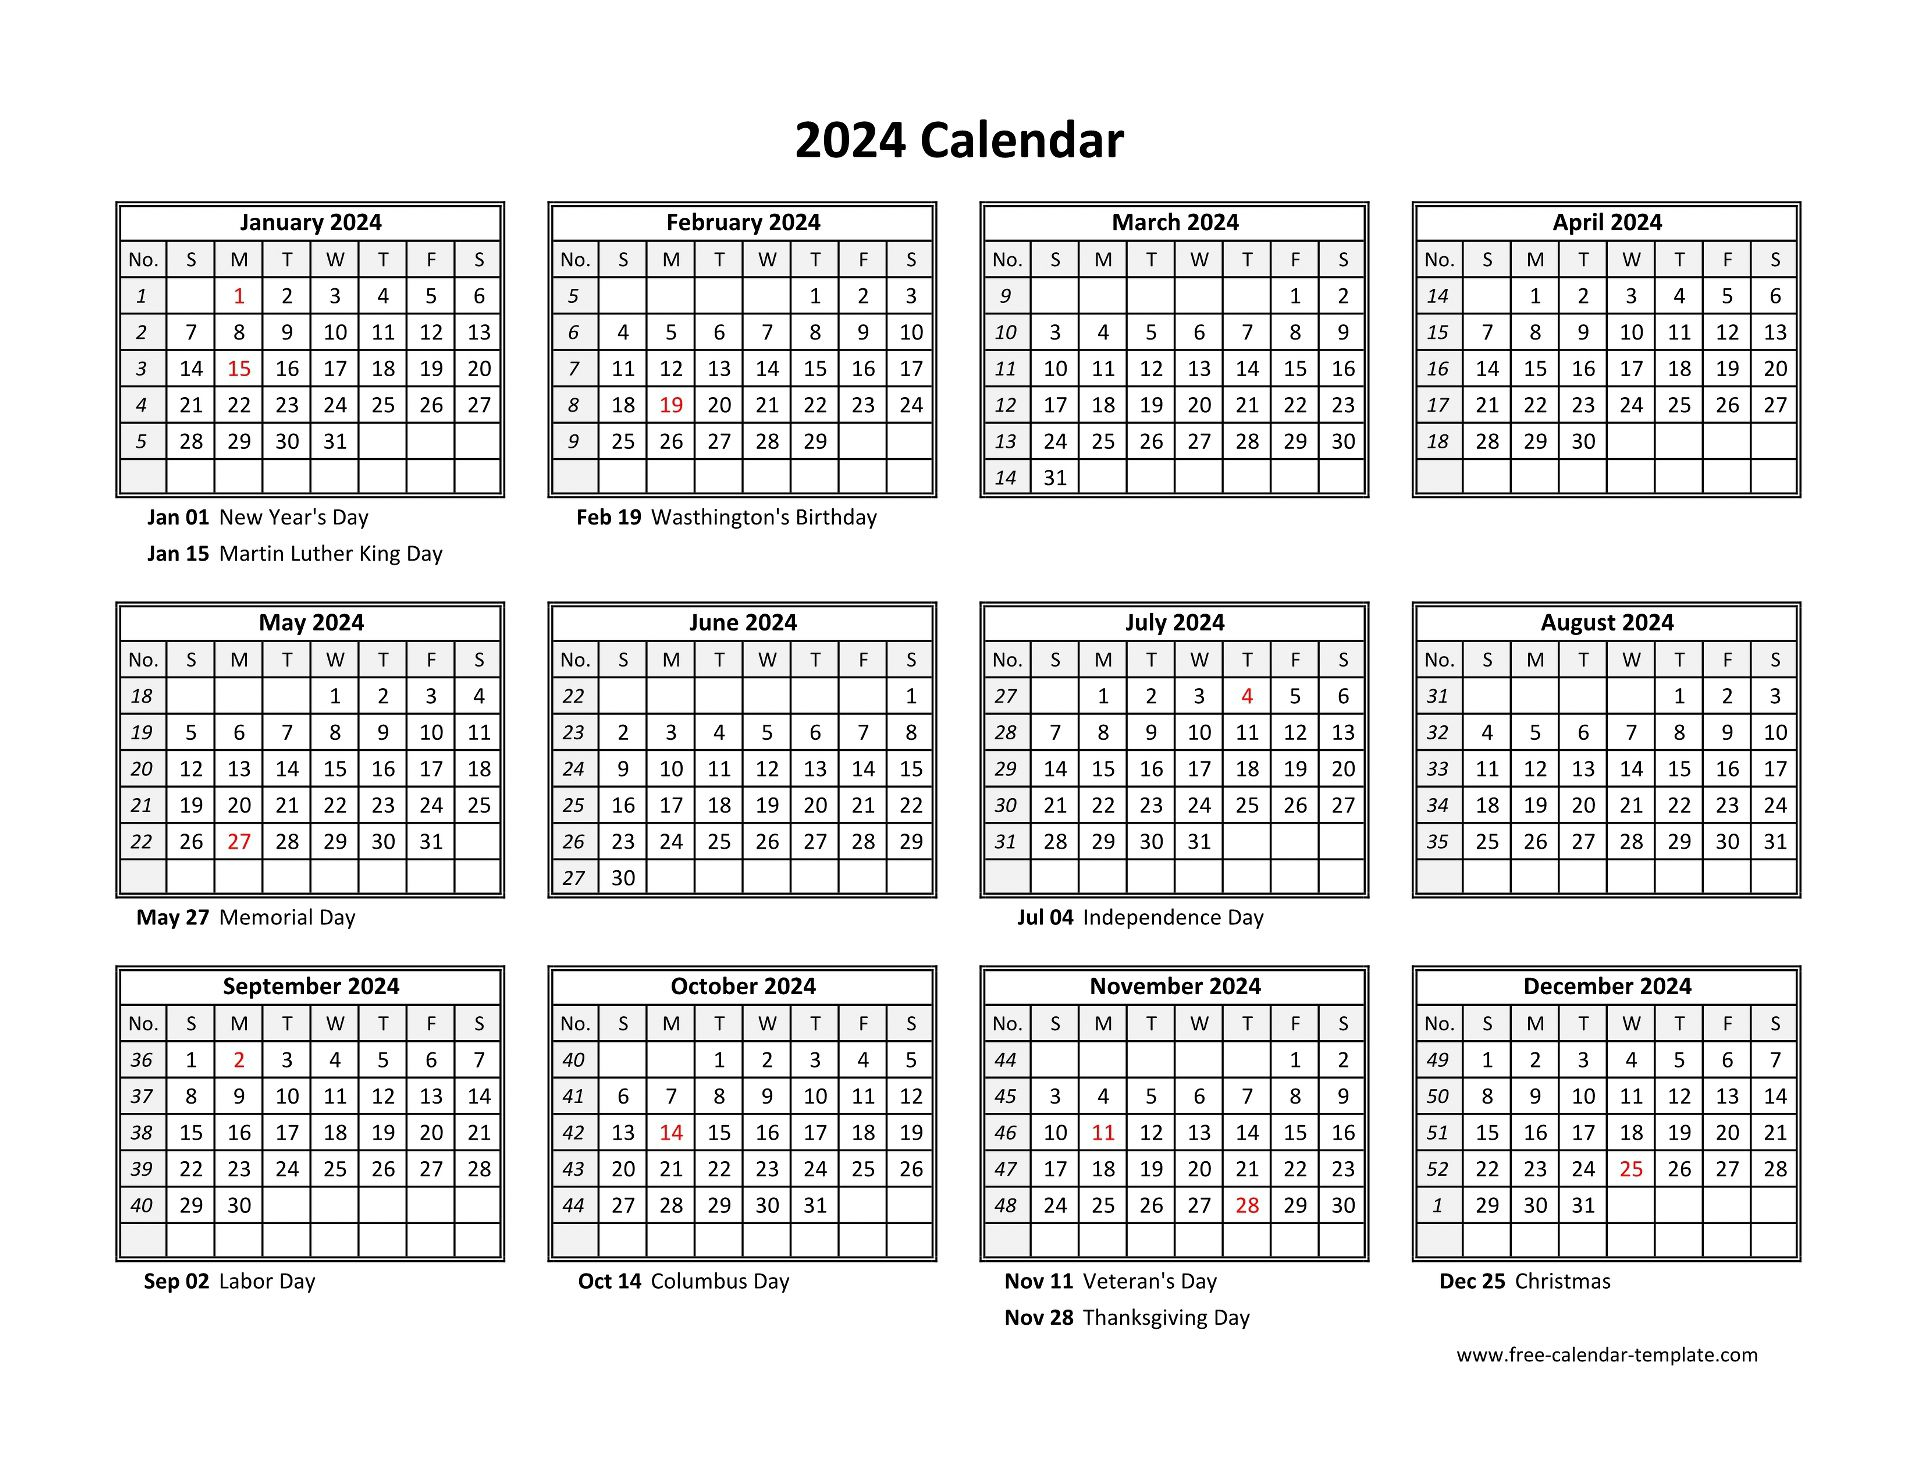 Yearly Calendar 2024 Printable With Federal Holidays | Free for Annual 2024 Calendar Printable